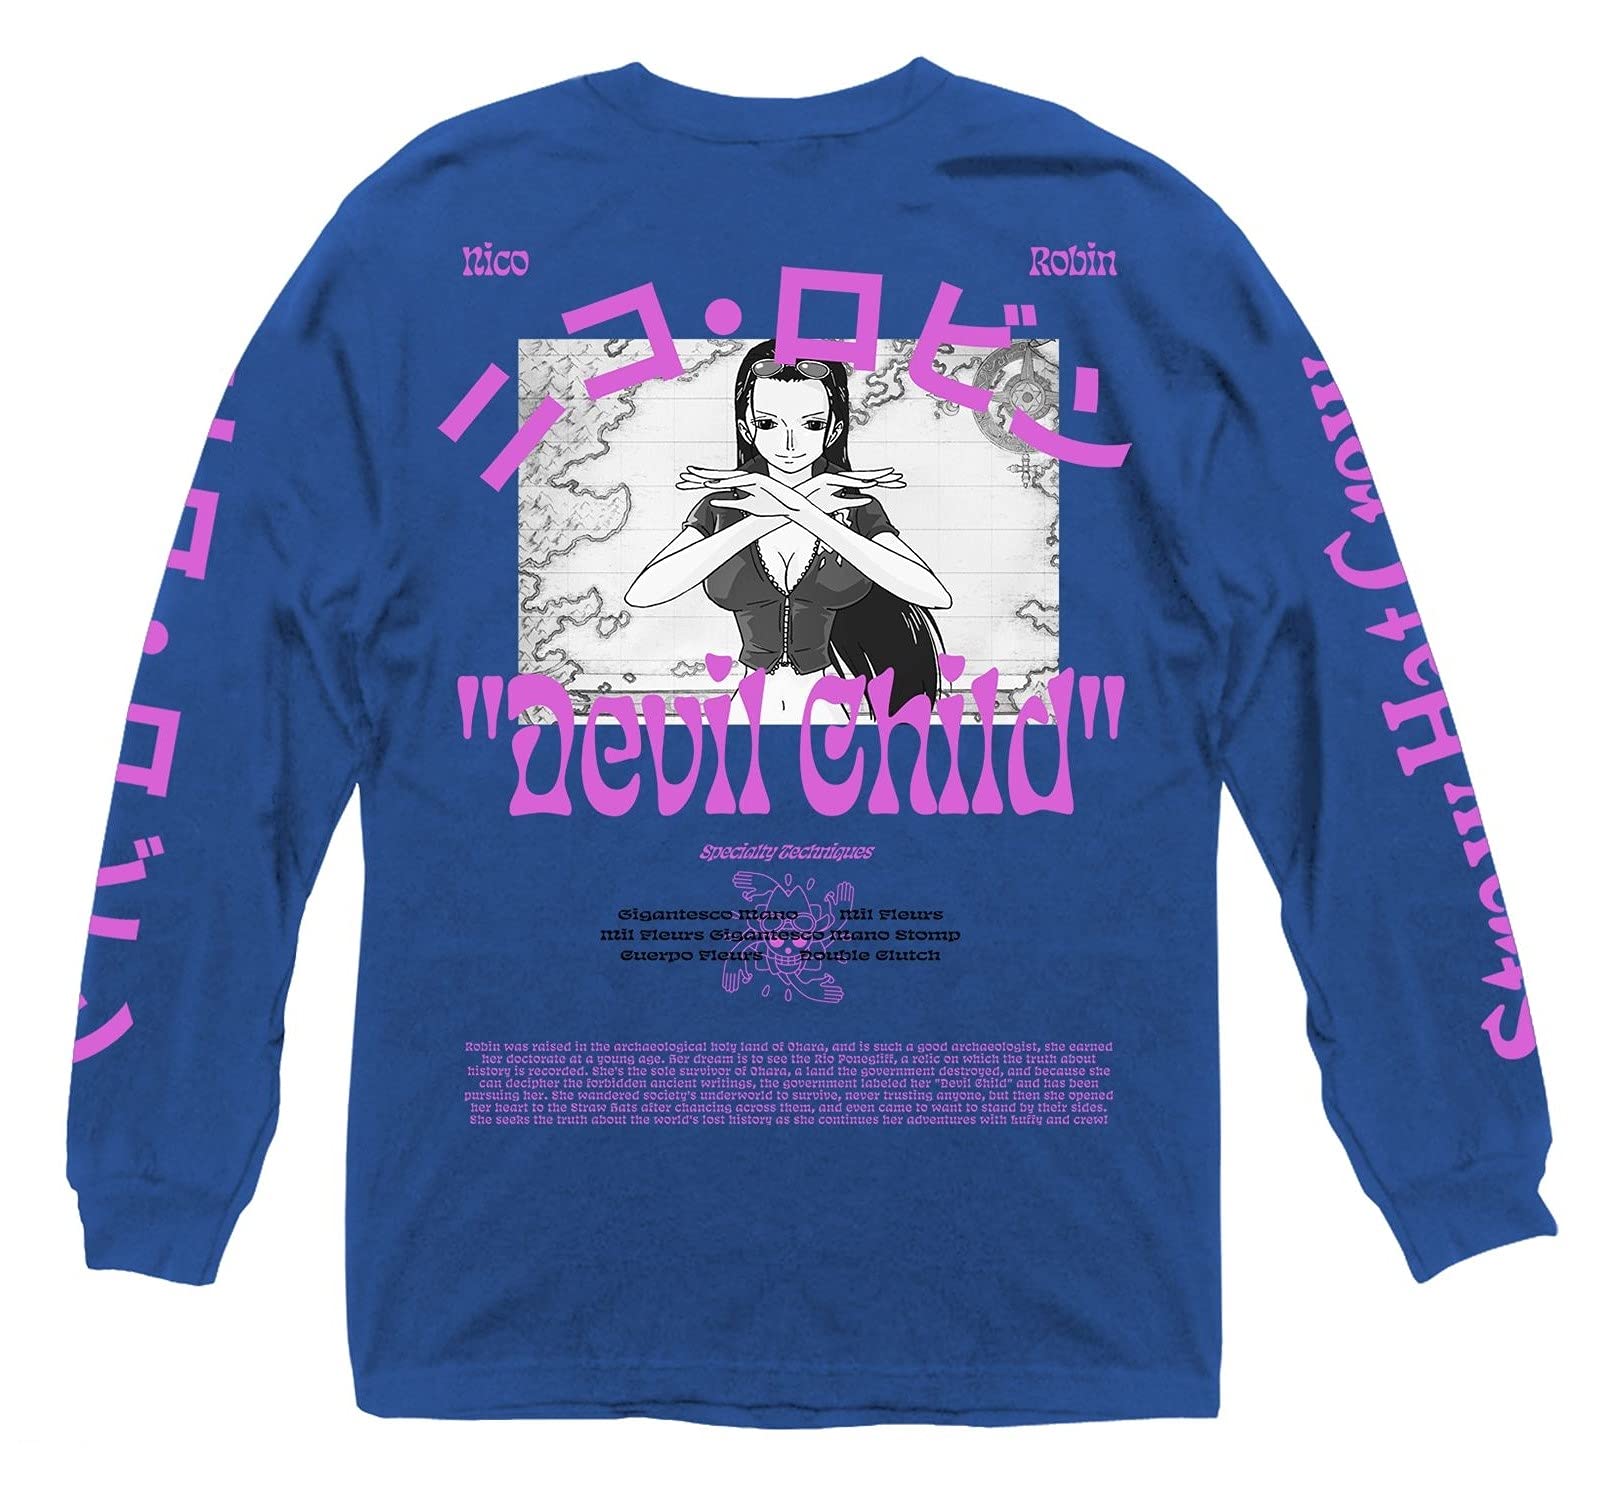 Ripple Junction One Piece Nico Robin Demon Child Anime Adult Long Sleeve Graphic T-Shirt